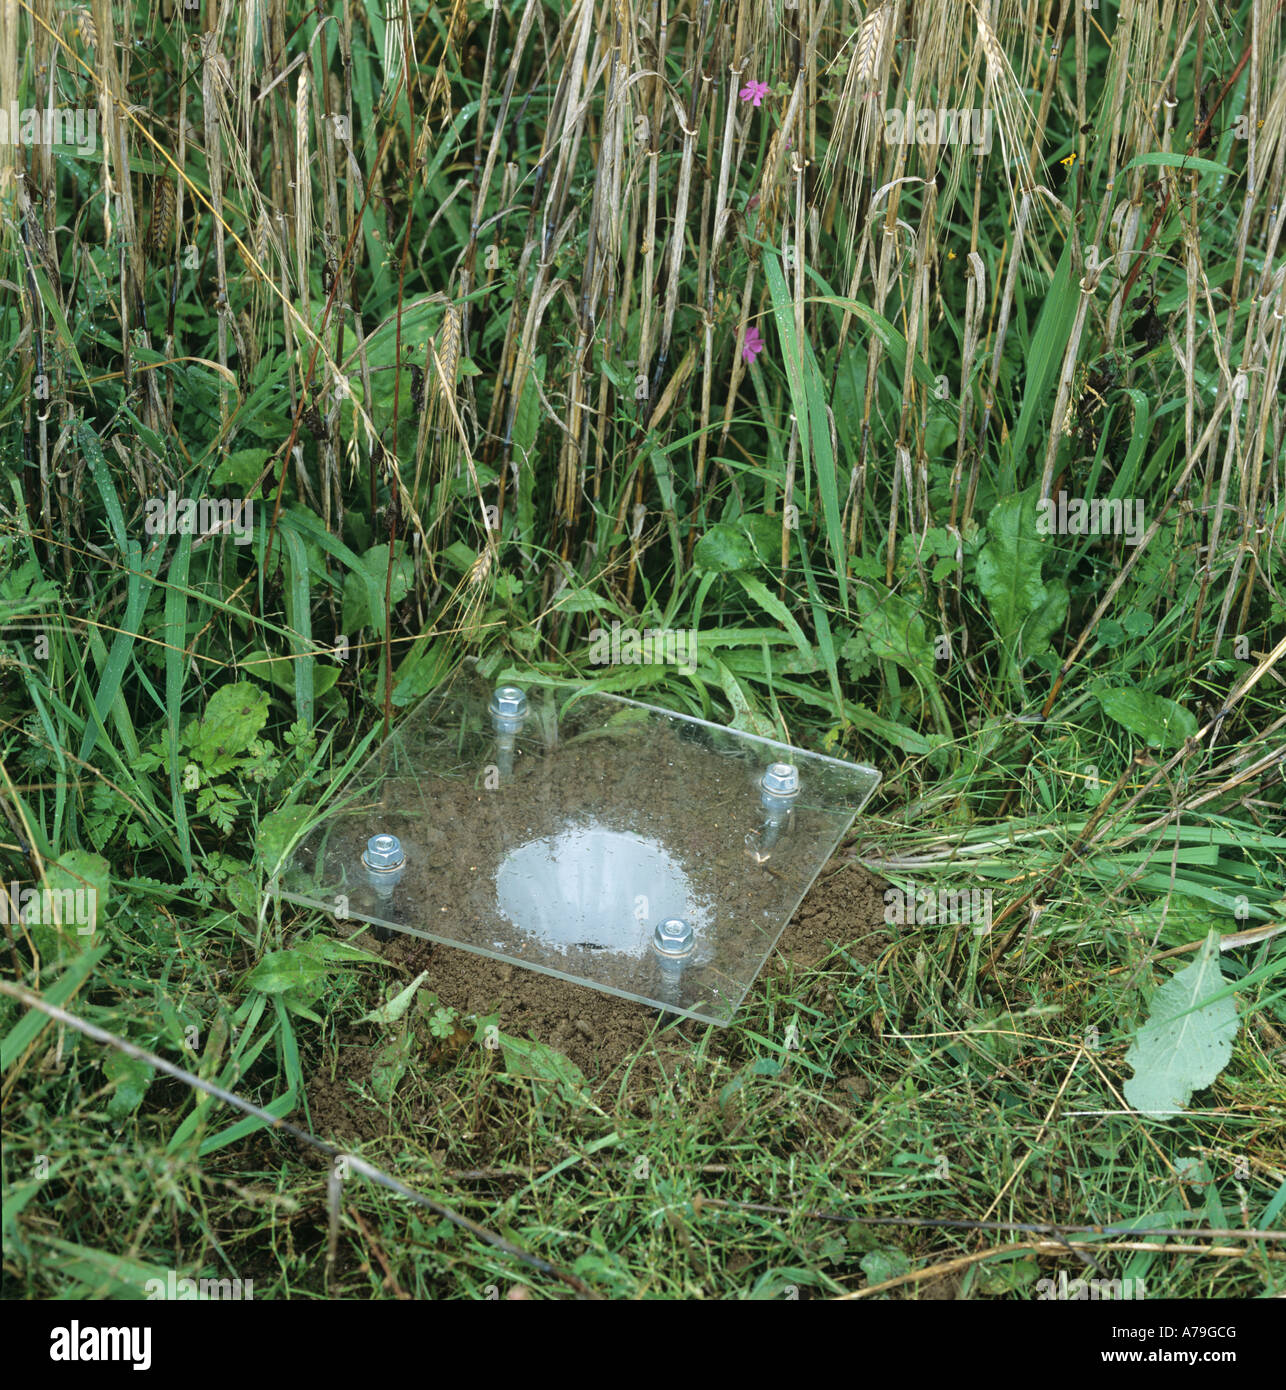 Pitfall trap with a rain cover for monitoring ground active arthropod populations Stock Photo